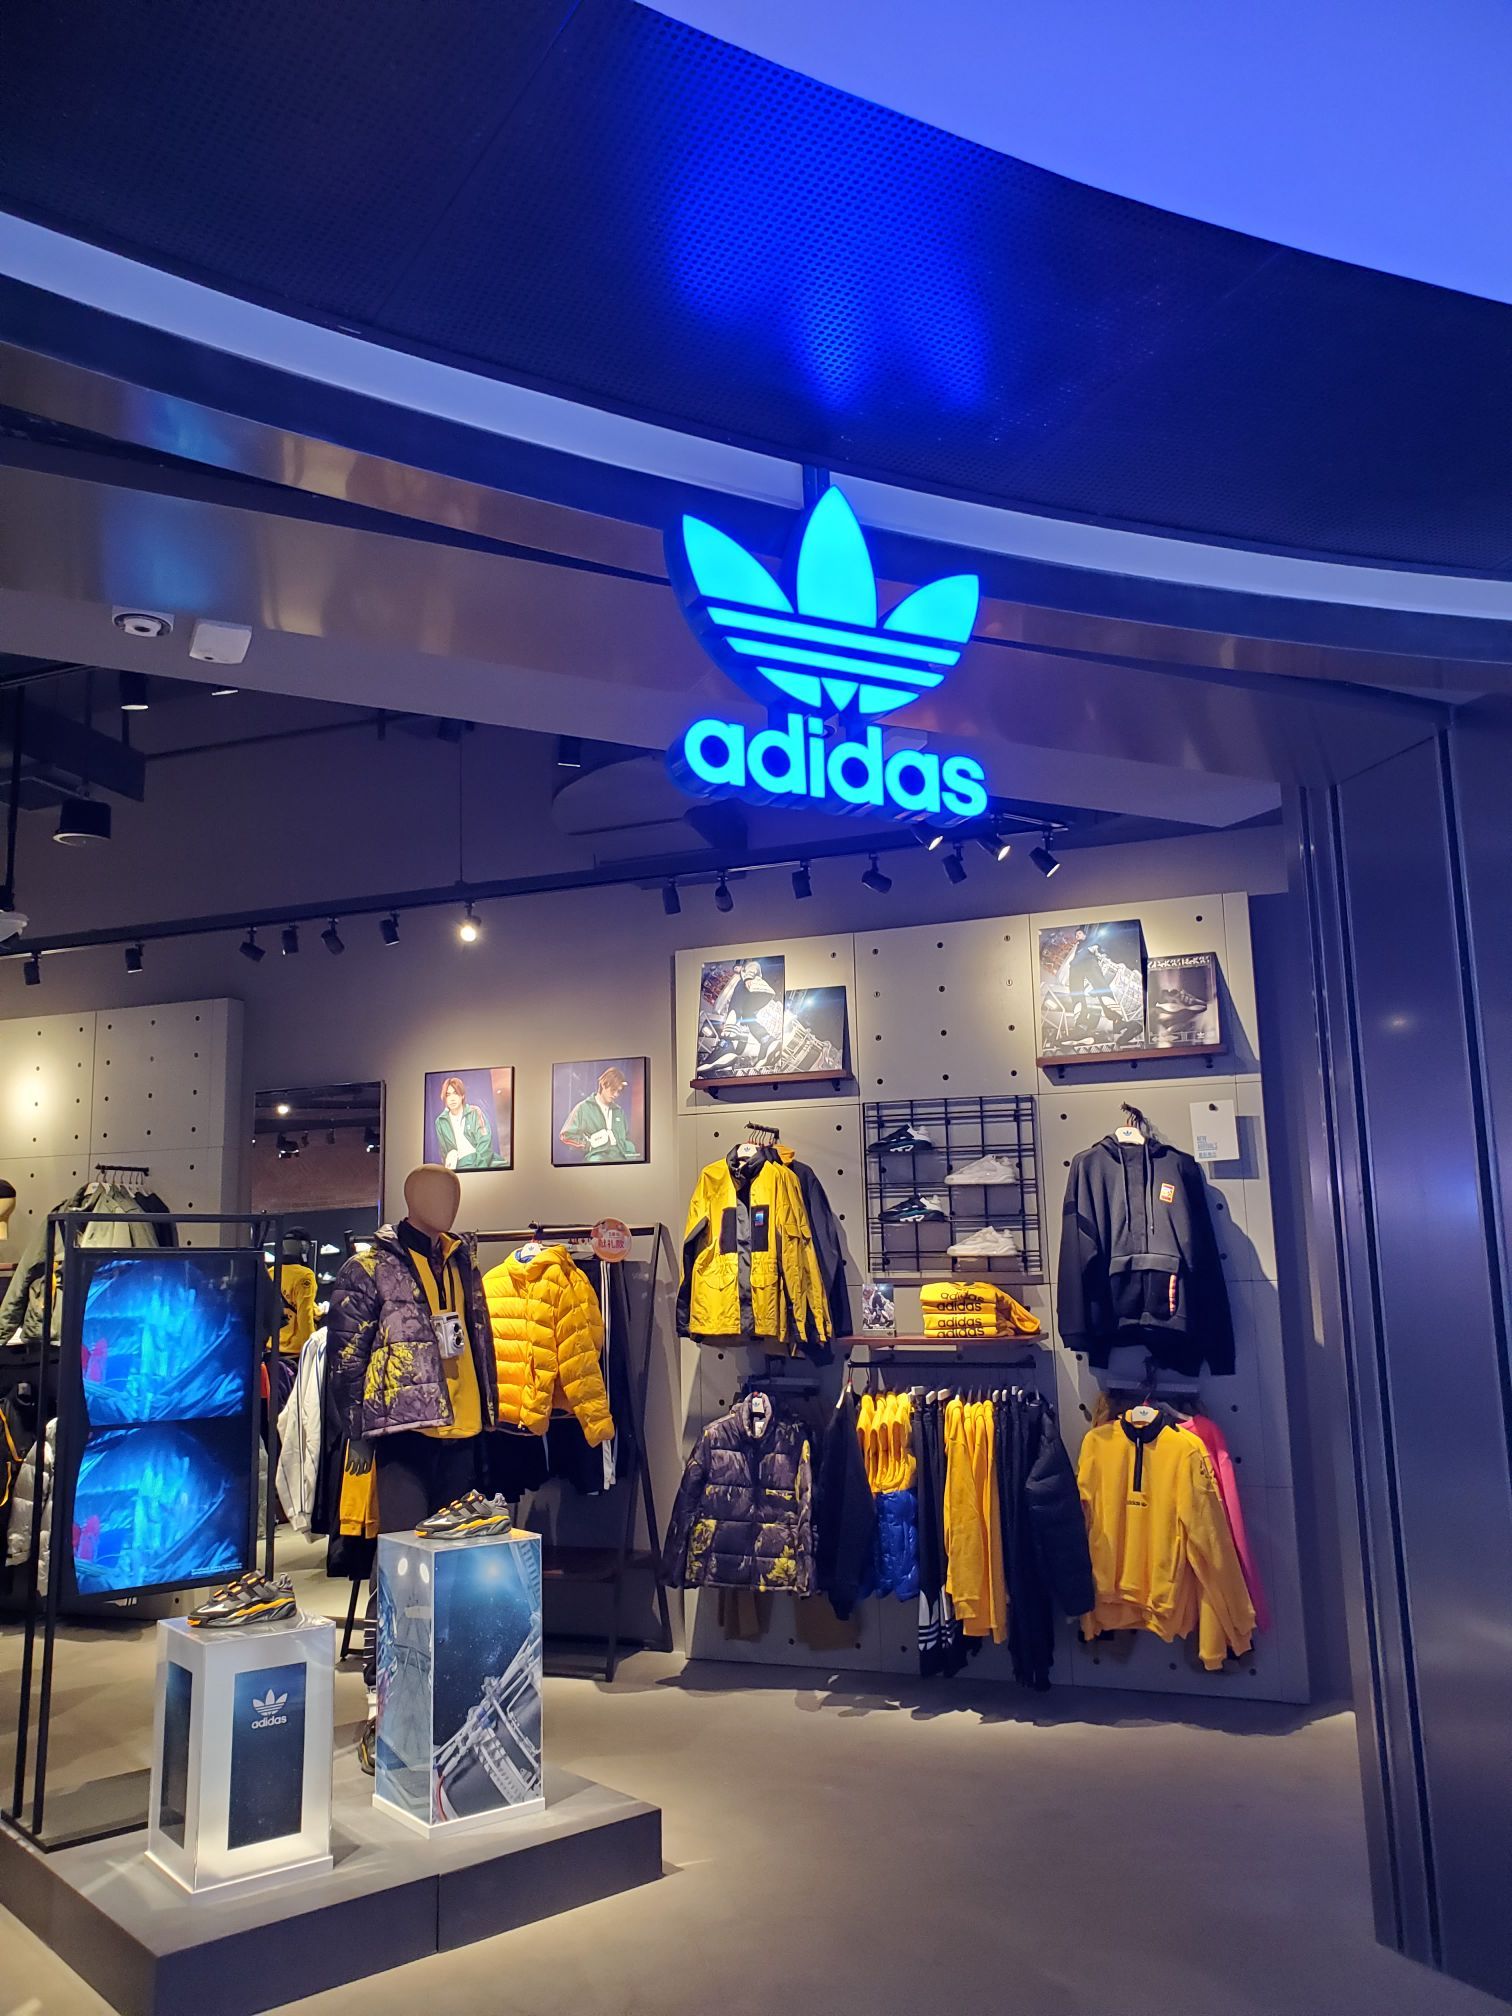 Shopping itineraries in Adidas Originals in 2023-05-21T17:00:00-07:00  (updated in 2023-05-21T17:00:00-07:00) - Trip.com